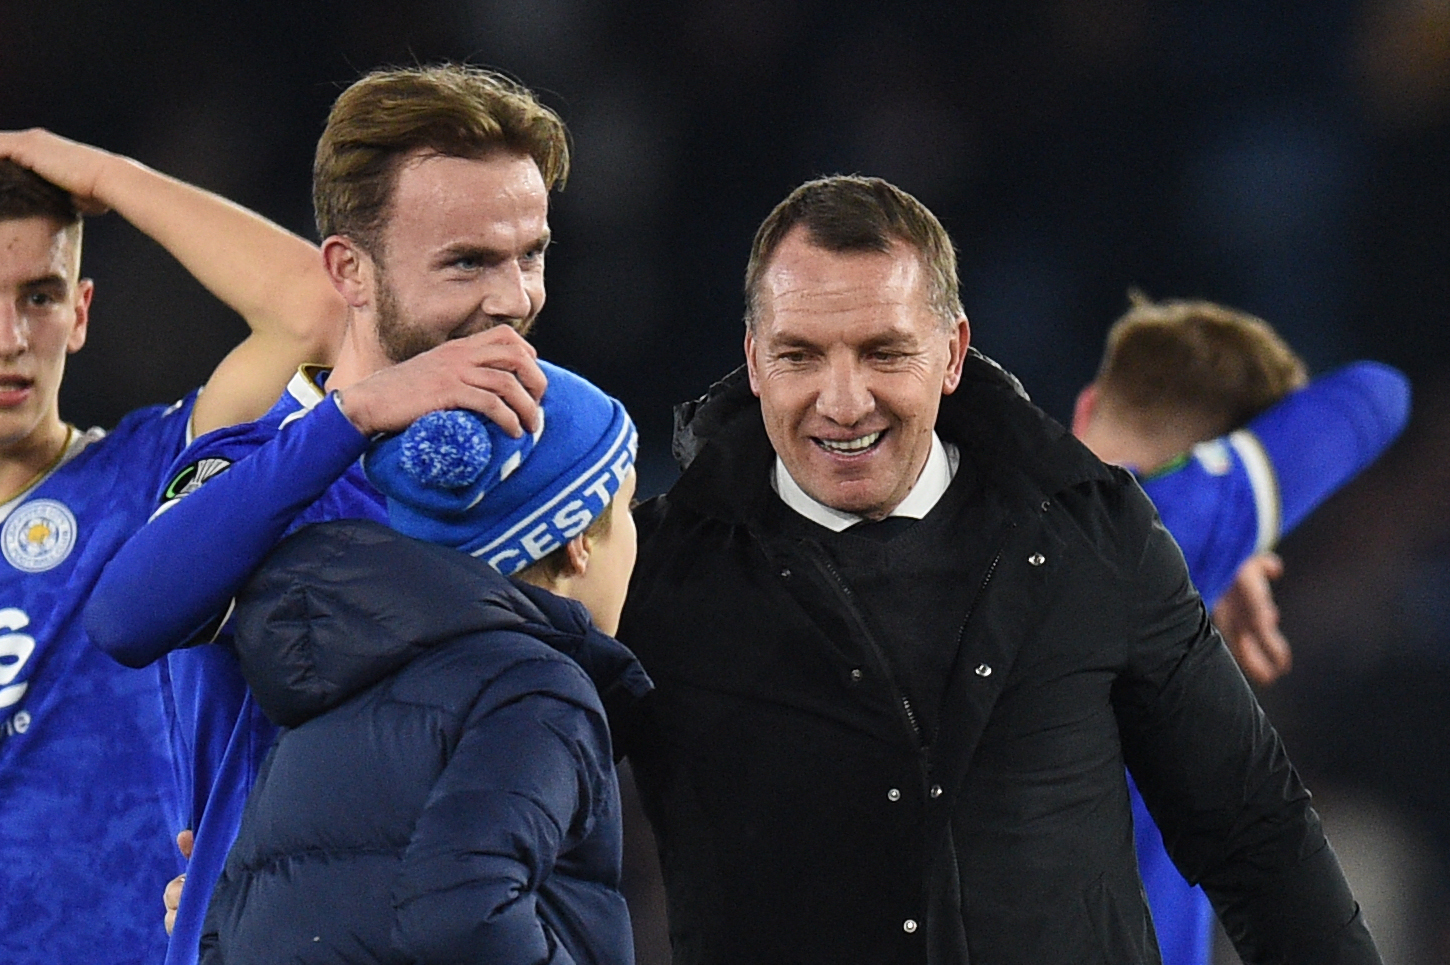 Leicester City's English midfielder James Maddison and manager Brendan Rodgers.